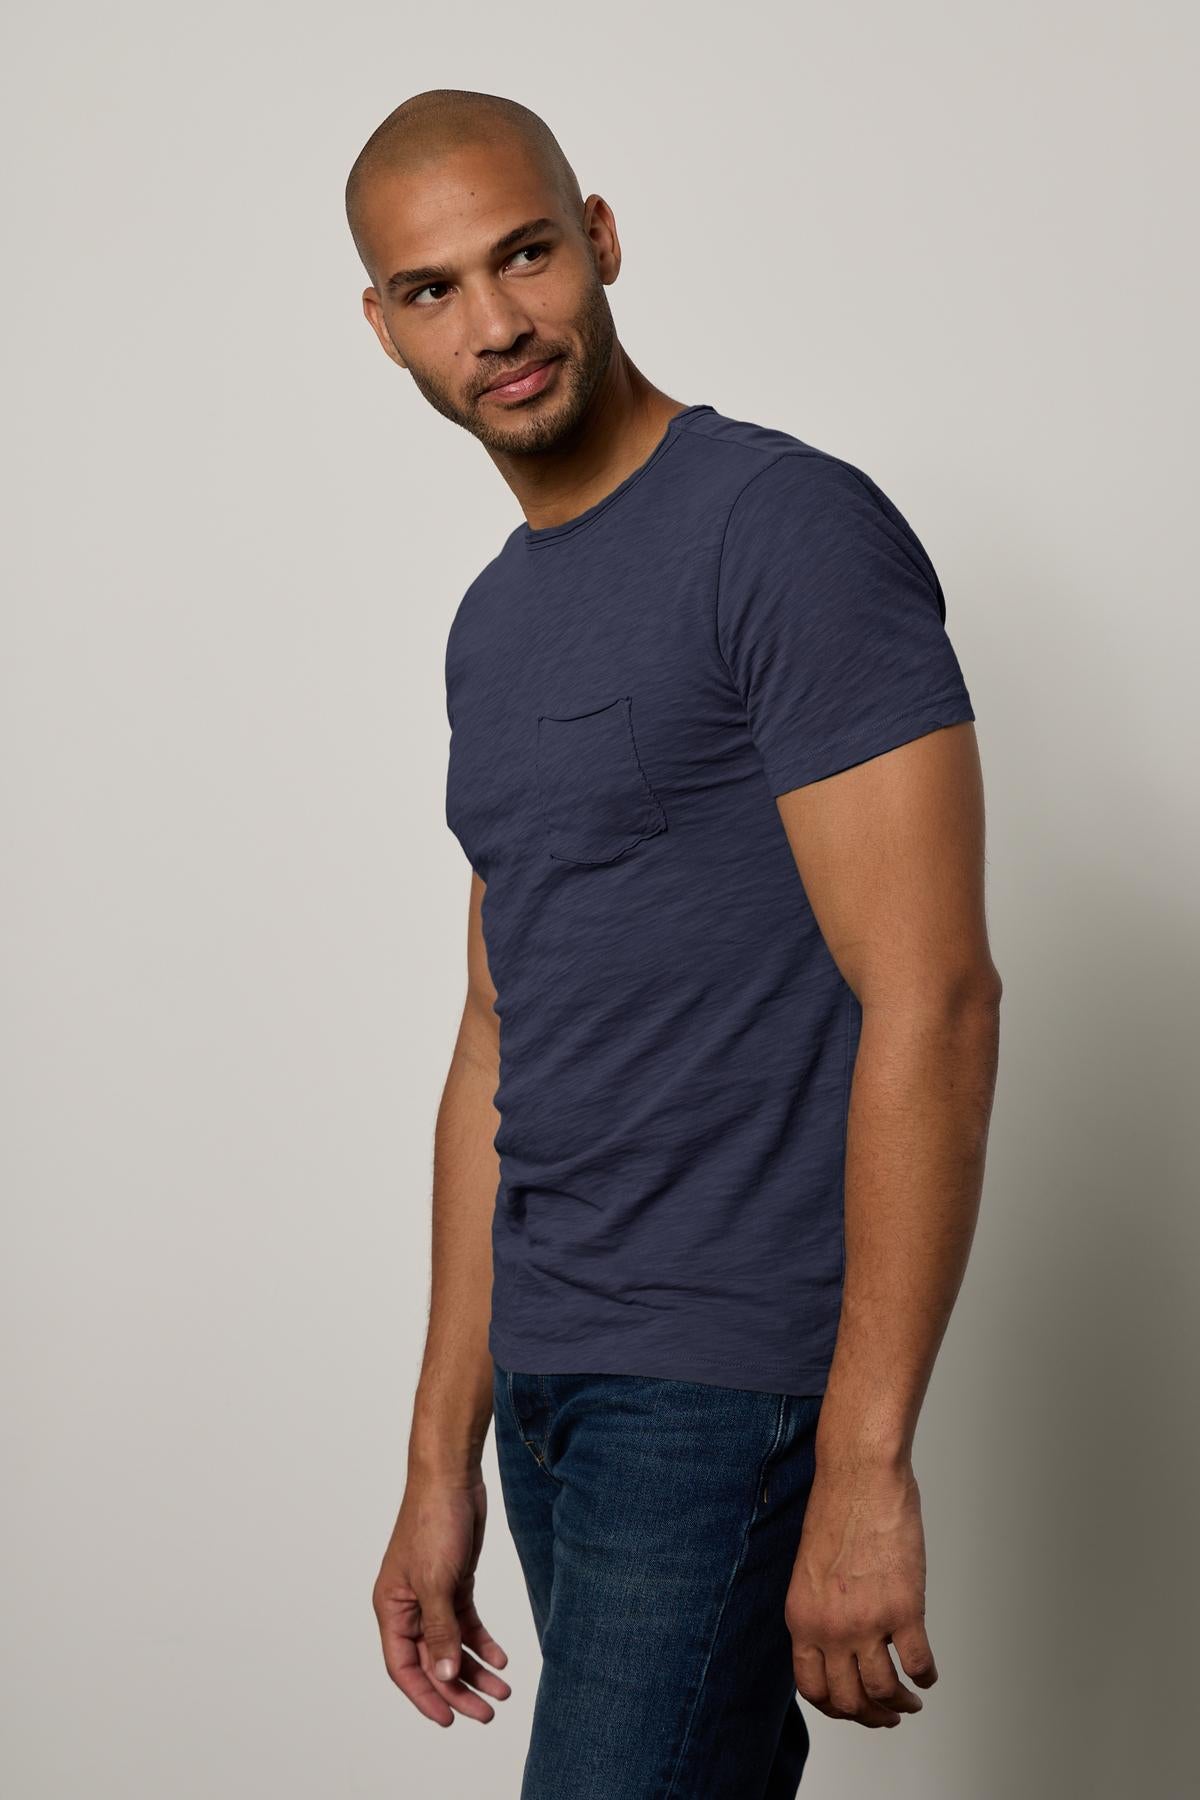 A man in a blue CHAD TEE from Velvet by Graham & Spencer with raw-edge details and jeans standing with his body turned slightly, looking at the camera with a slight smile.-26146501263553